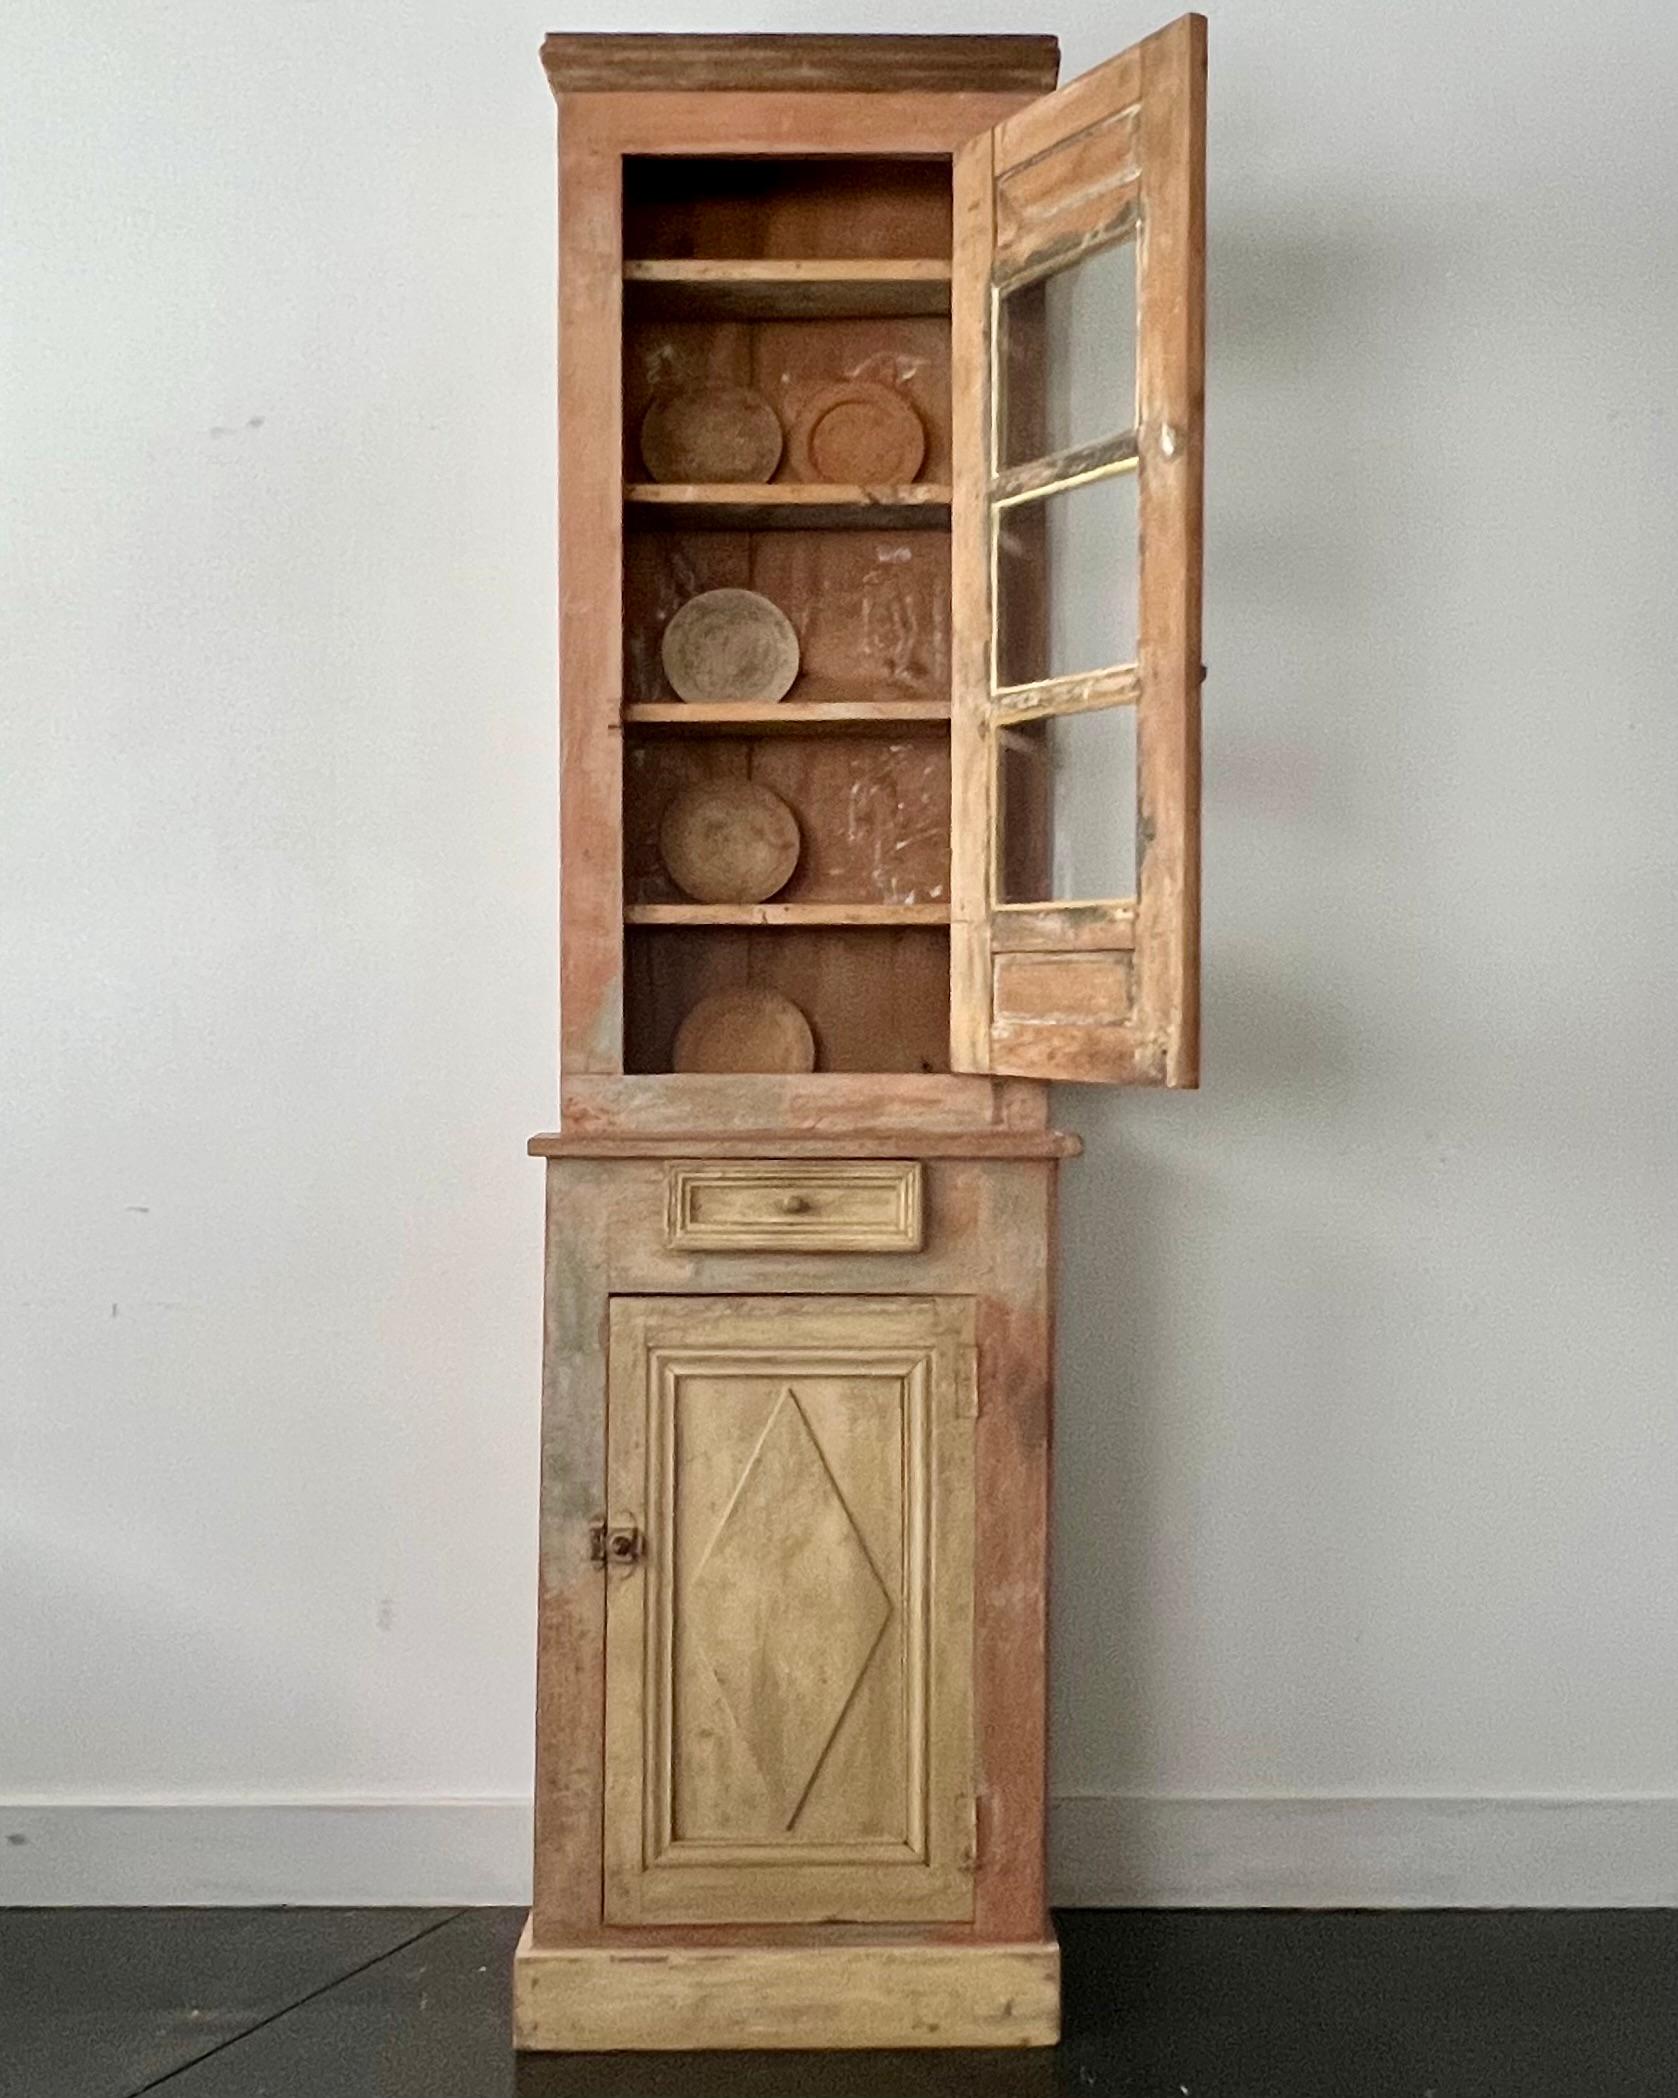 19th century Swedish rustic tall and narrow Vitrine Cabinet, Upper part cabinet with glass paneled doors and the classic diamond  shape motif.
Lower part cabinet wit on drawer and one door base.

